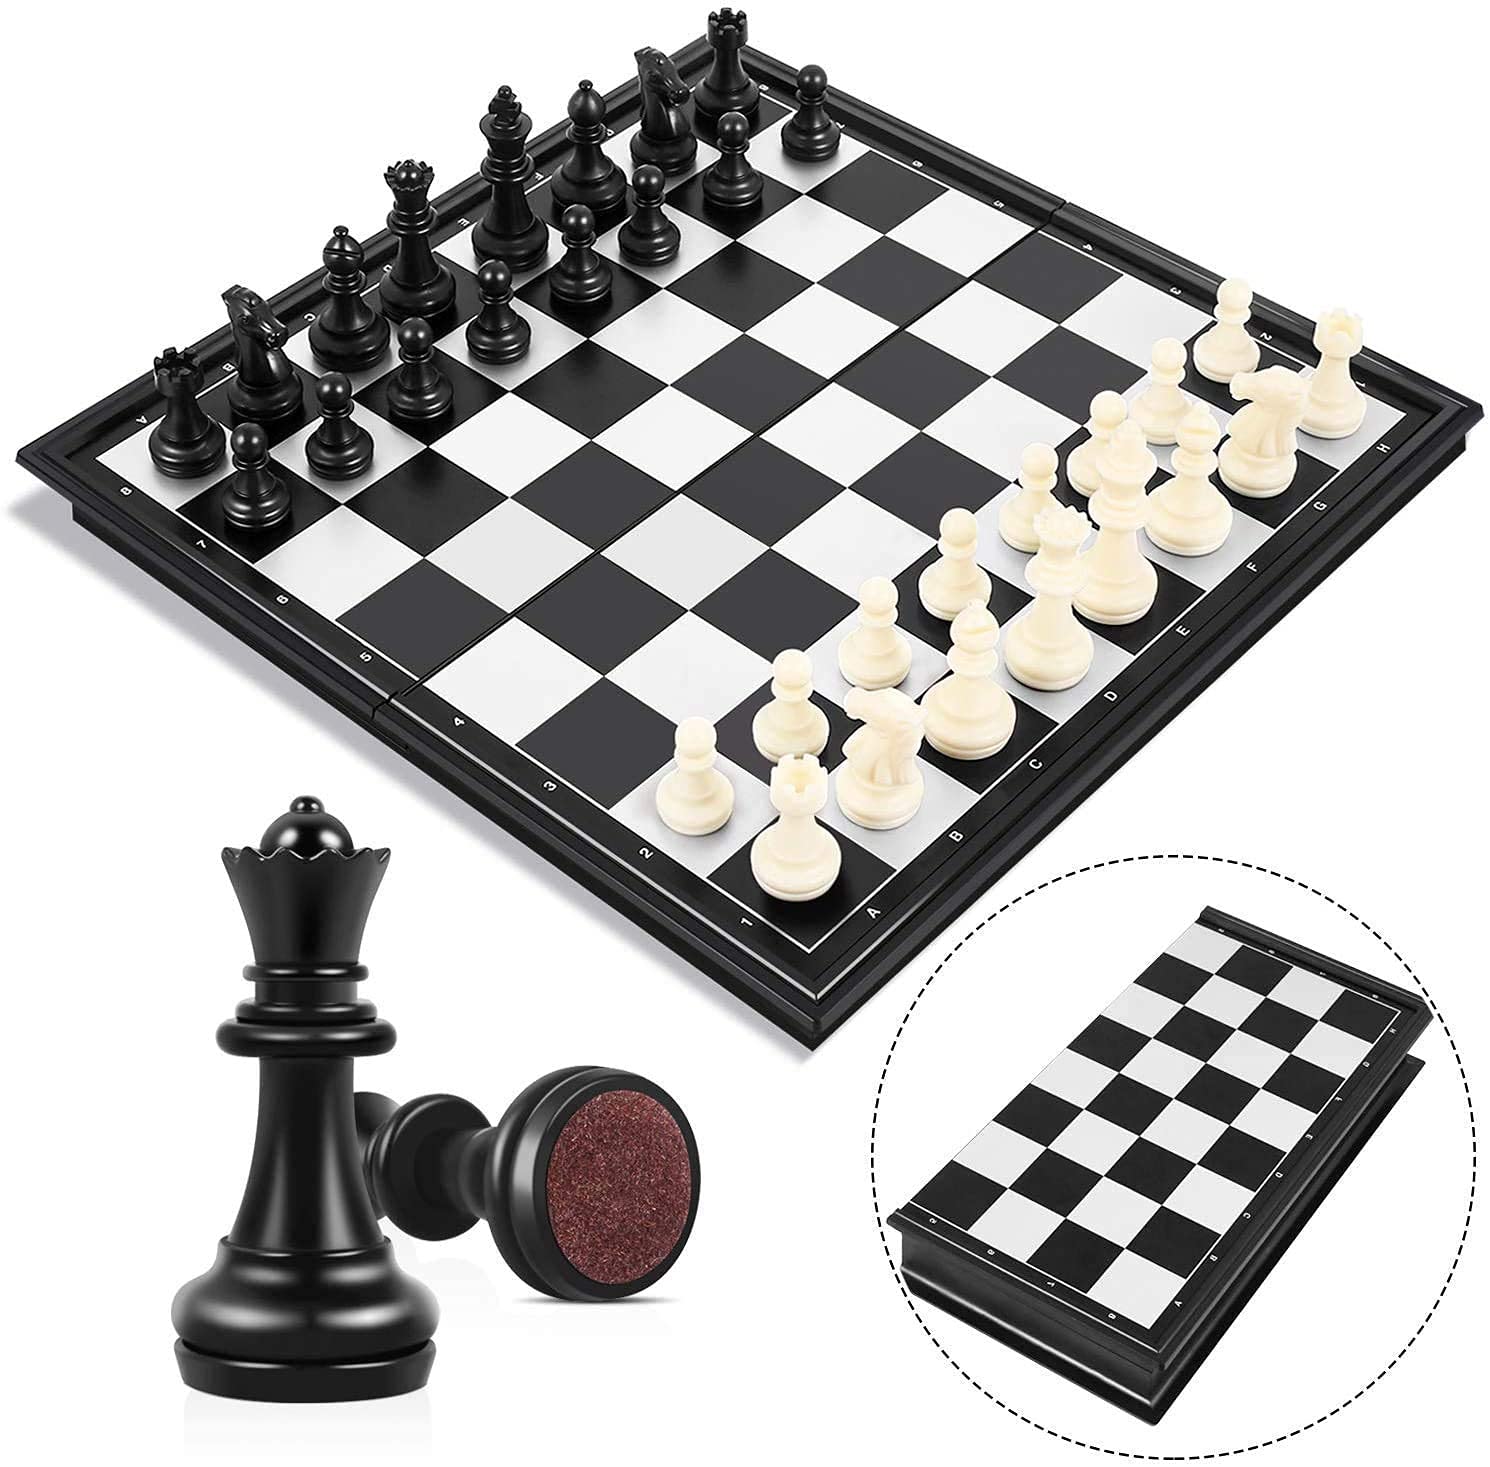 Kids Mandi magnetic travel chess set for educational fun and learning.